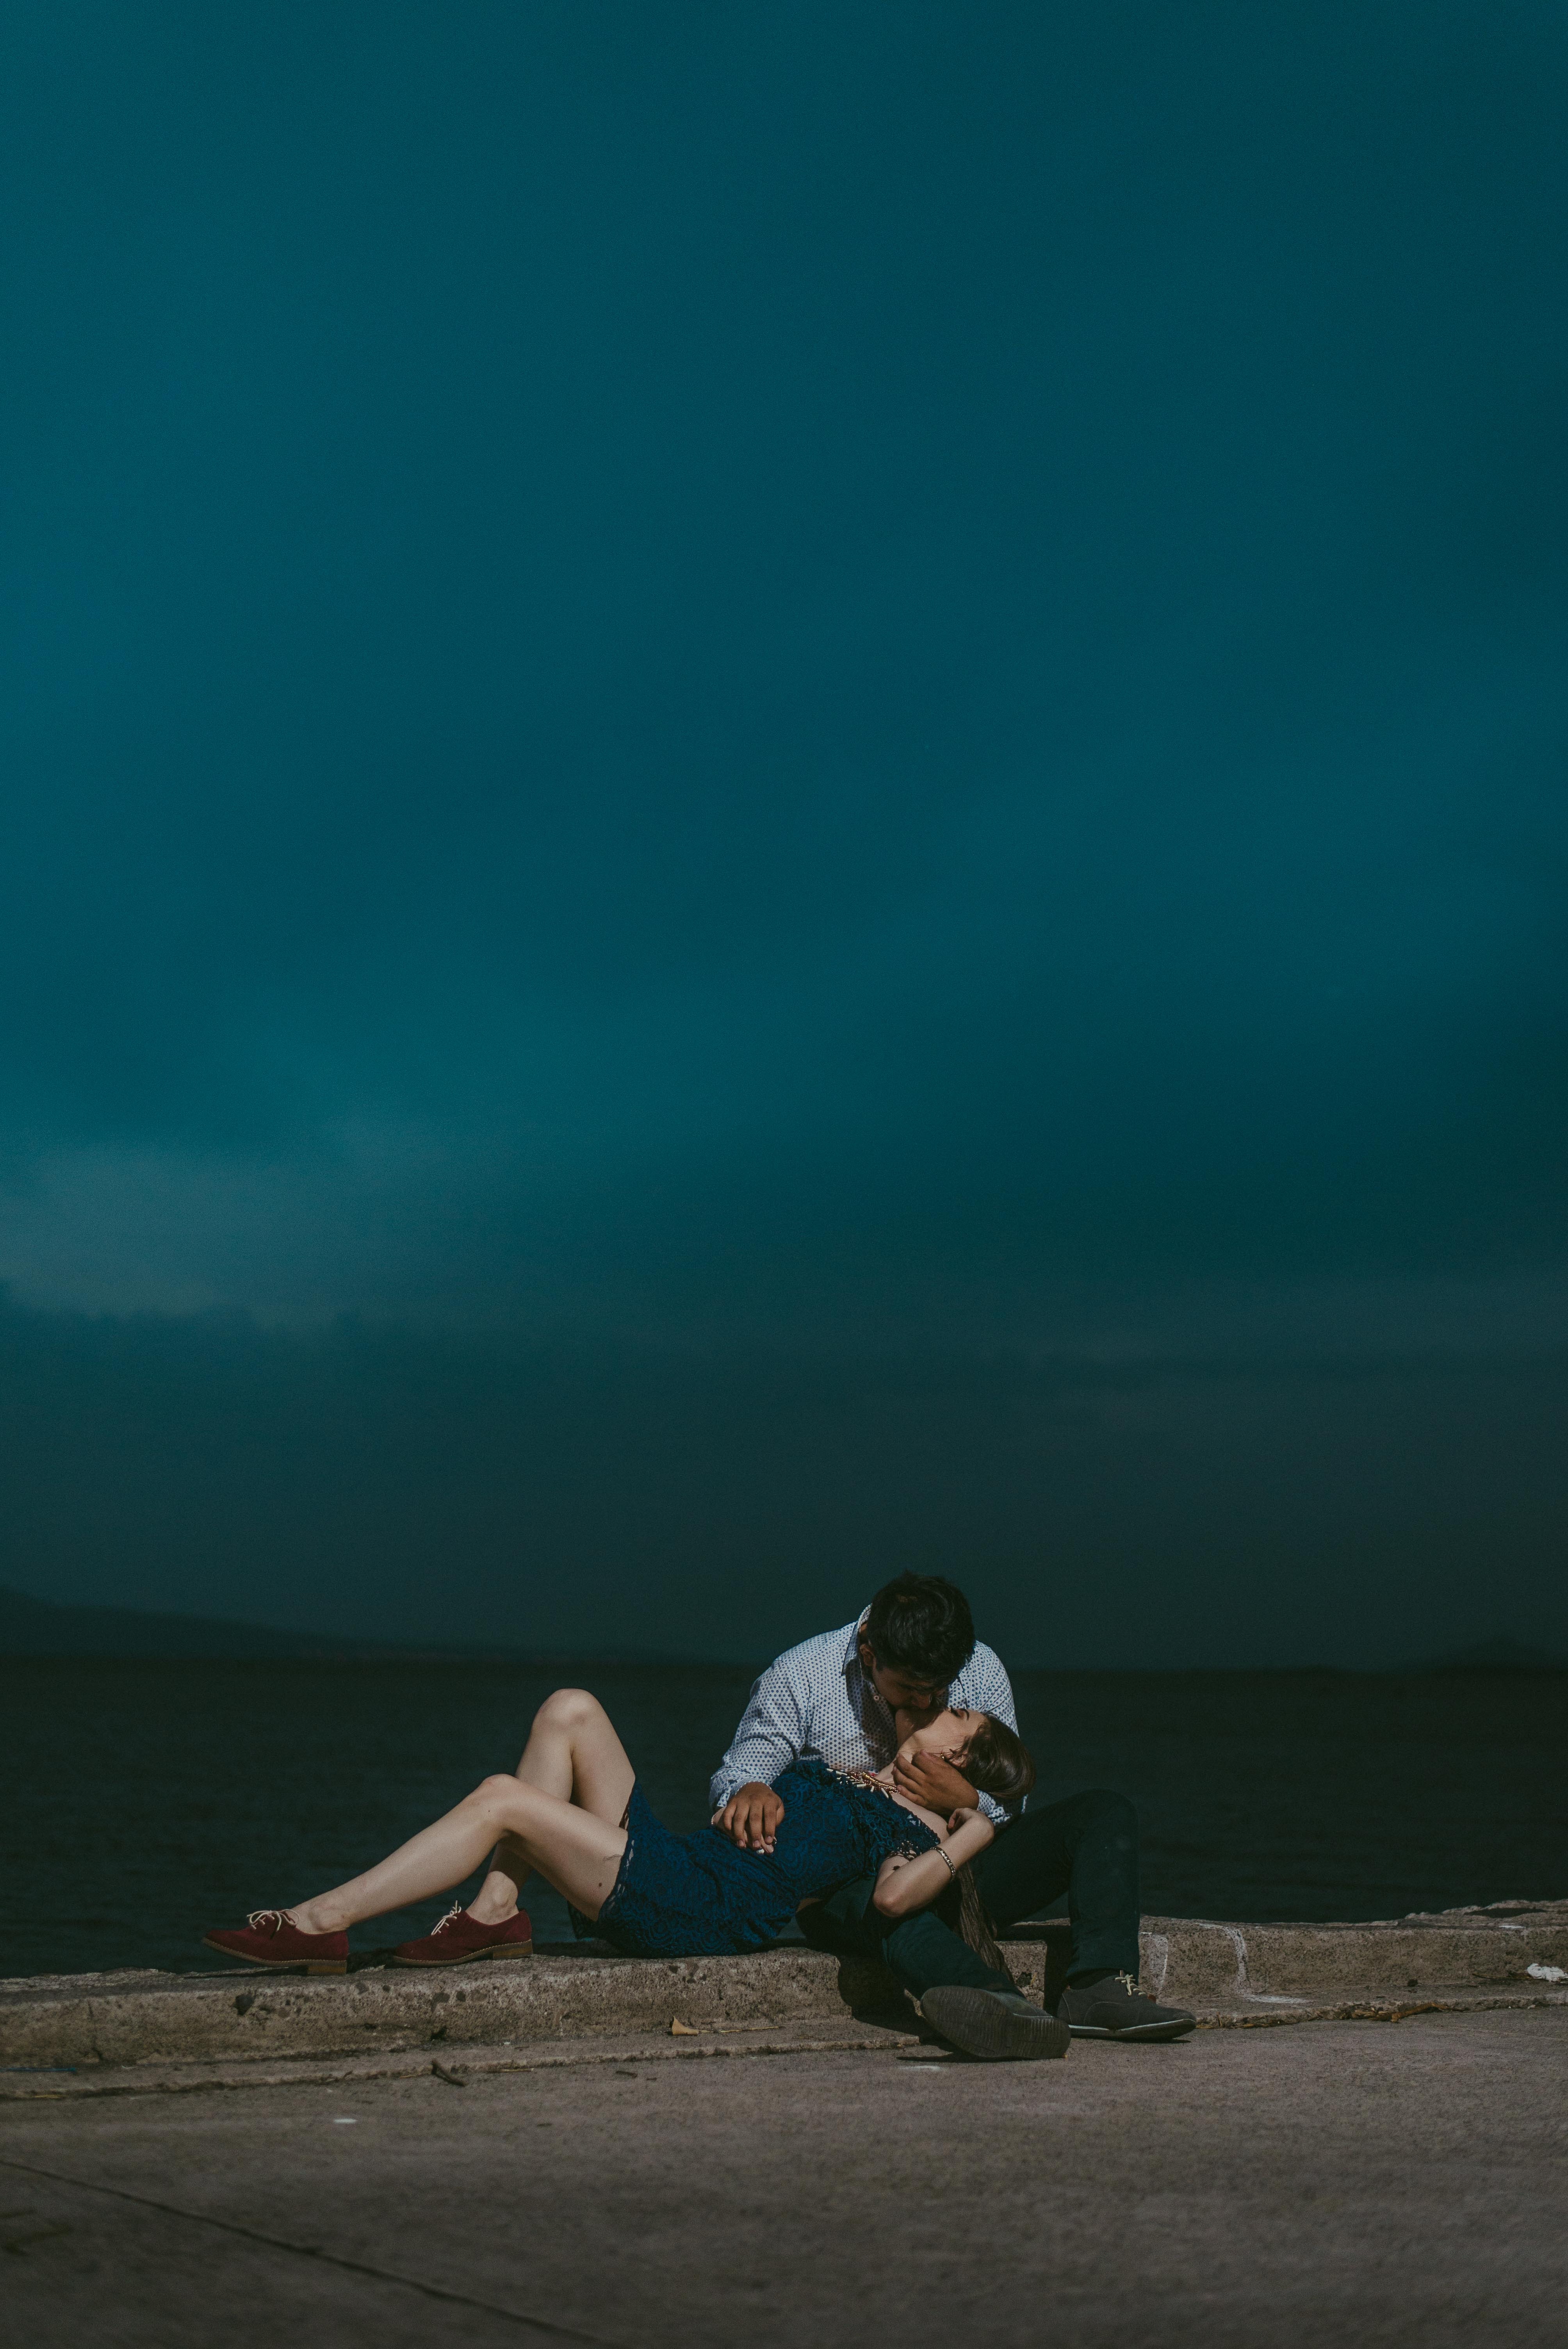 Two individuals kissing│ Source: Unsplash